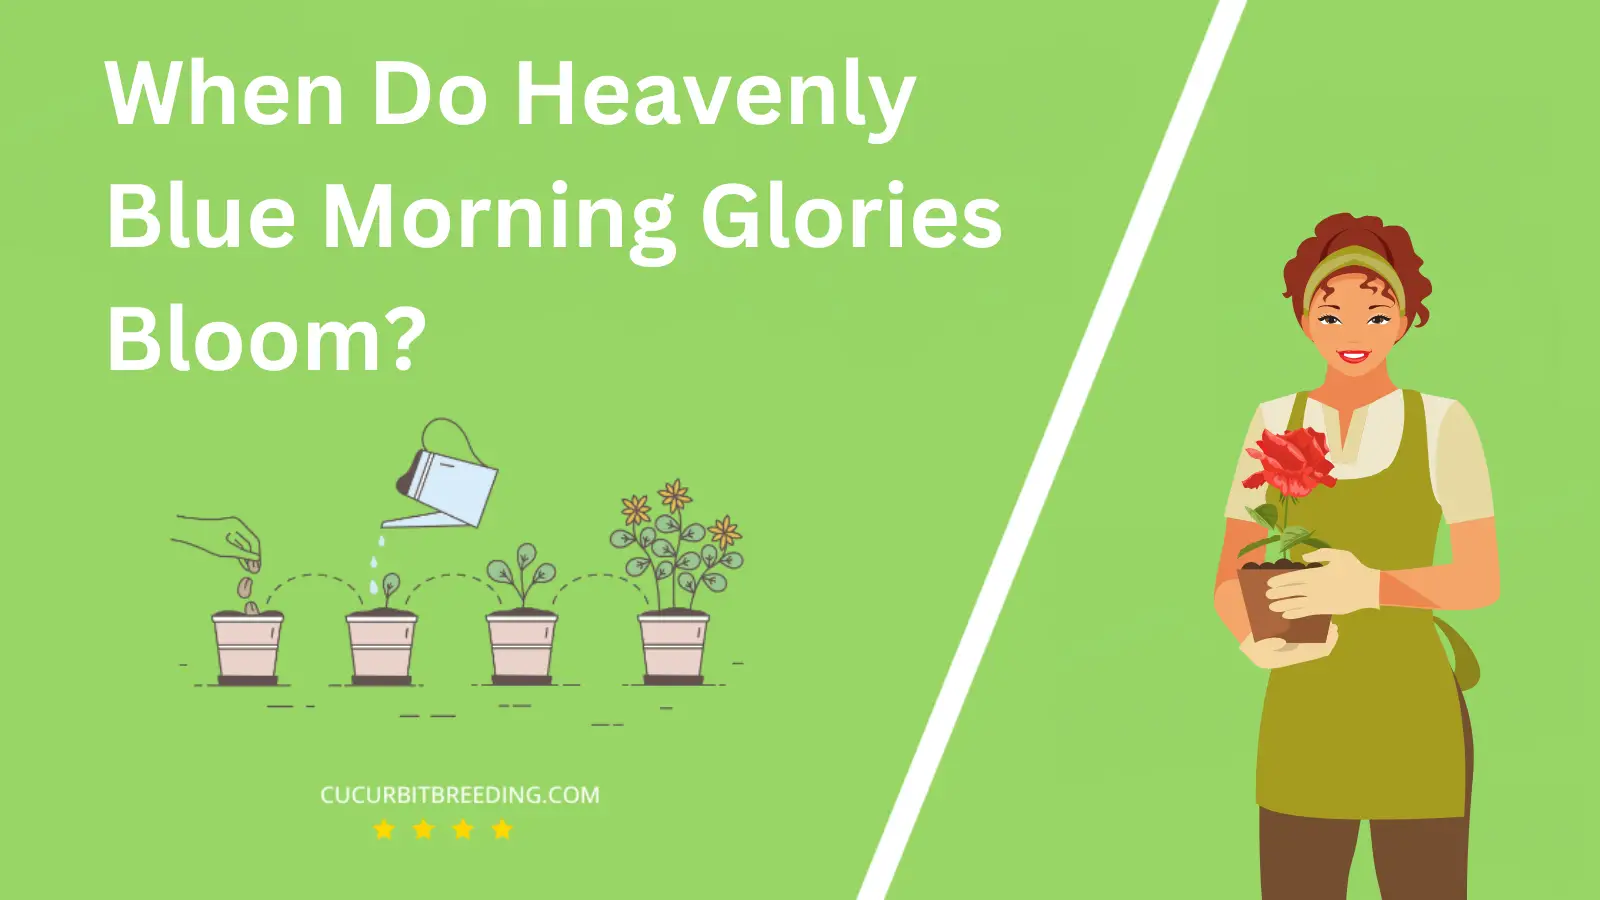 When Do Heavenly Blue Morning Glories Bloom?